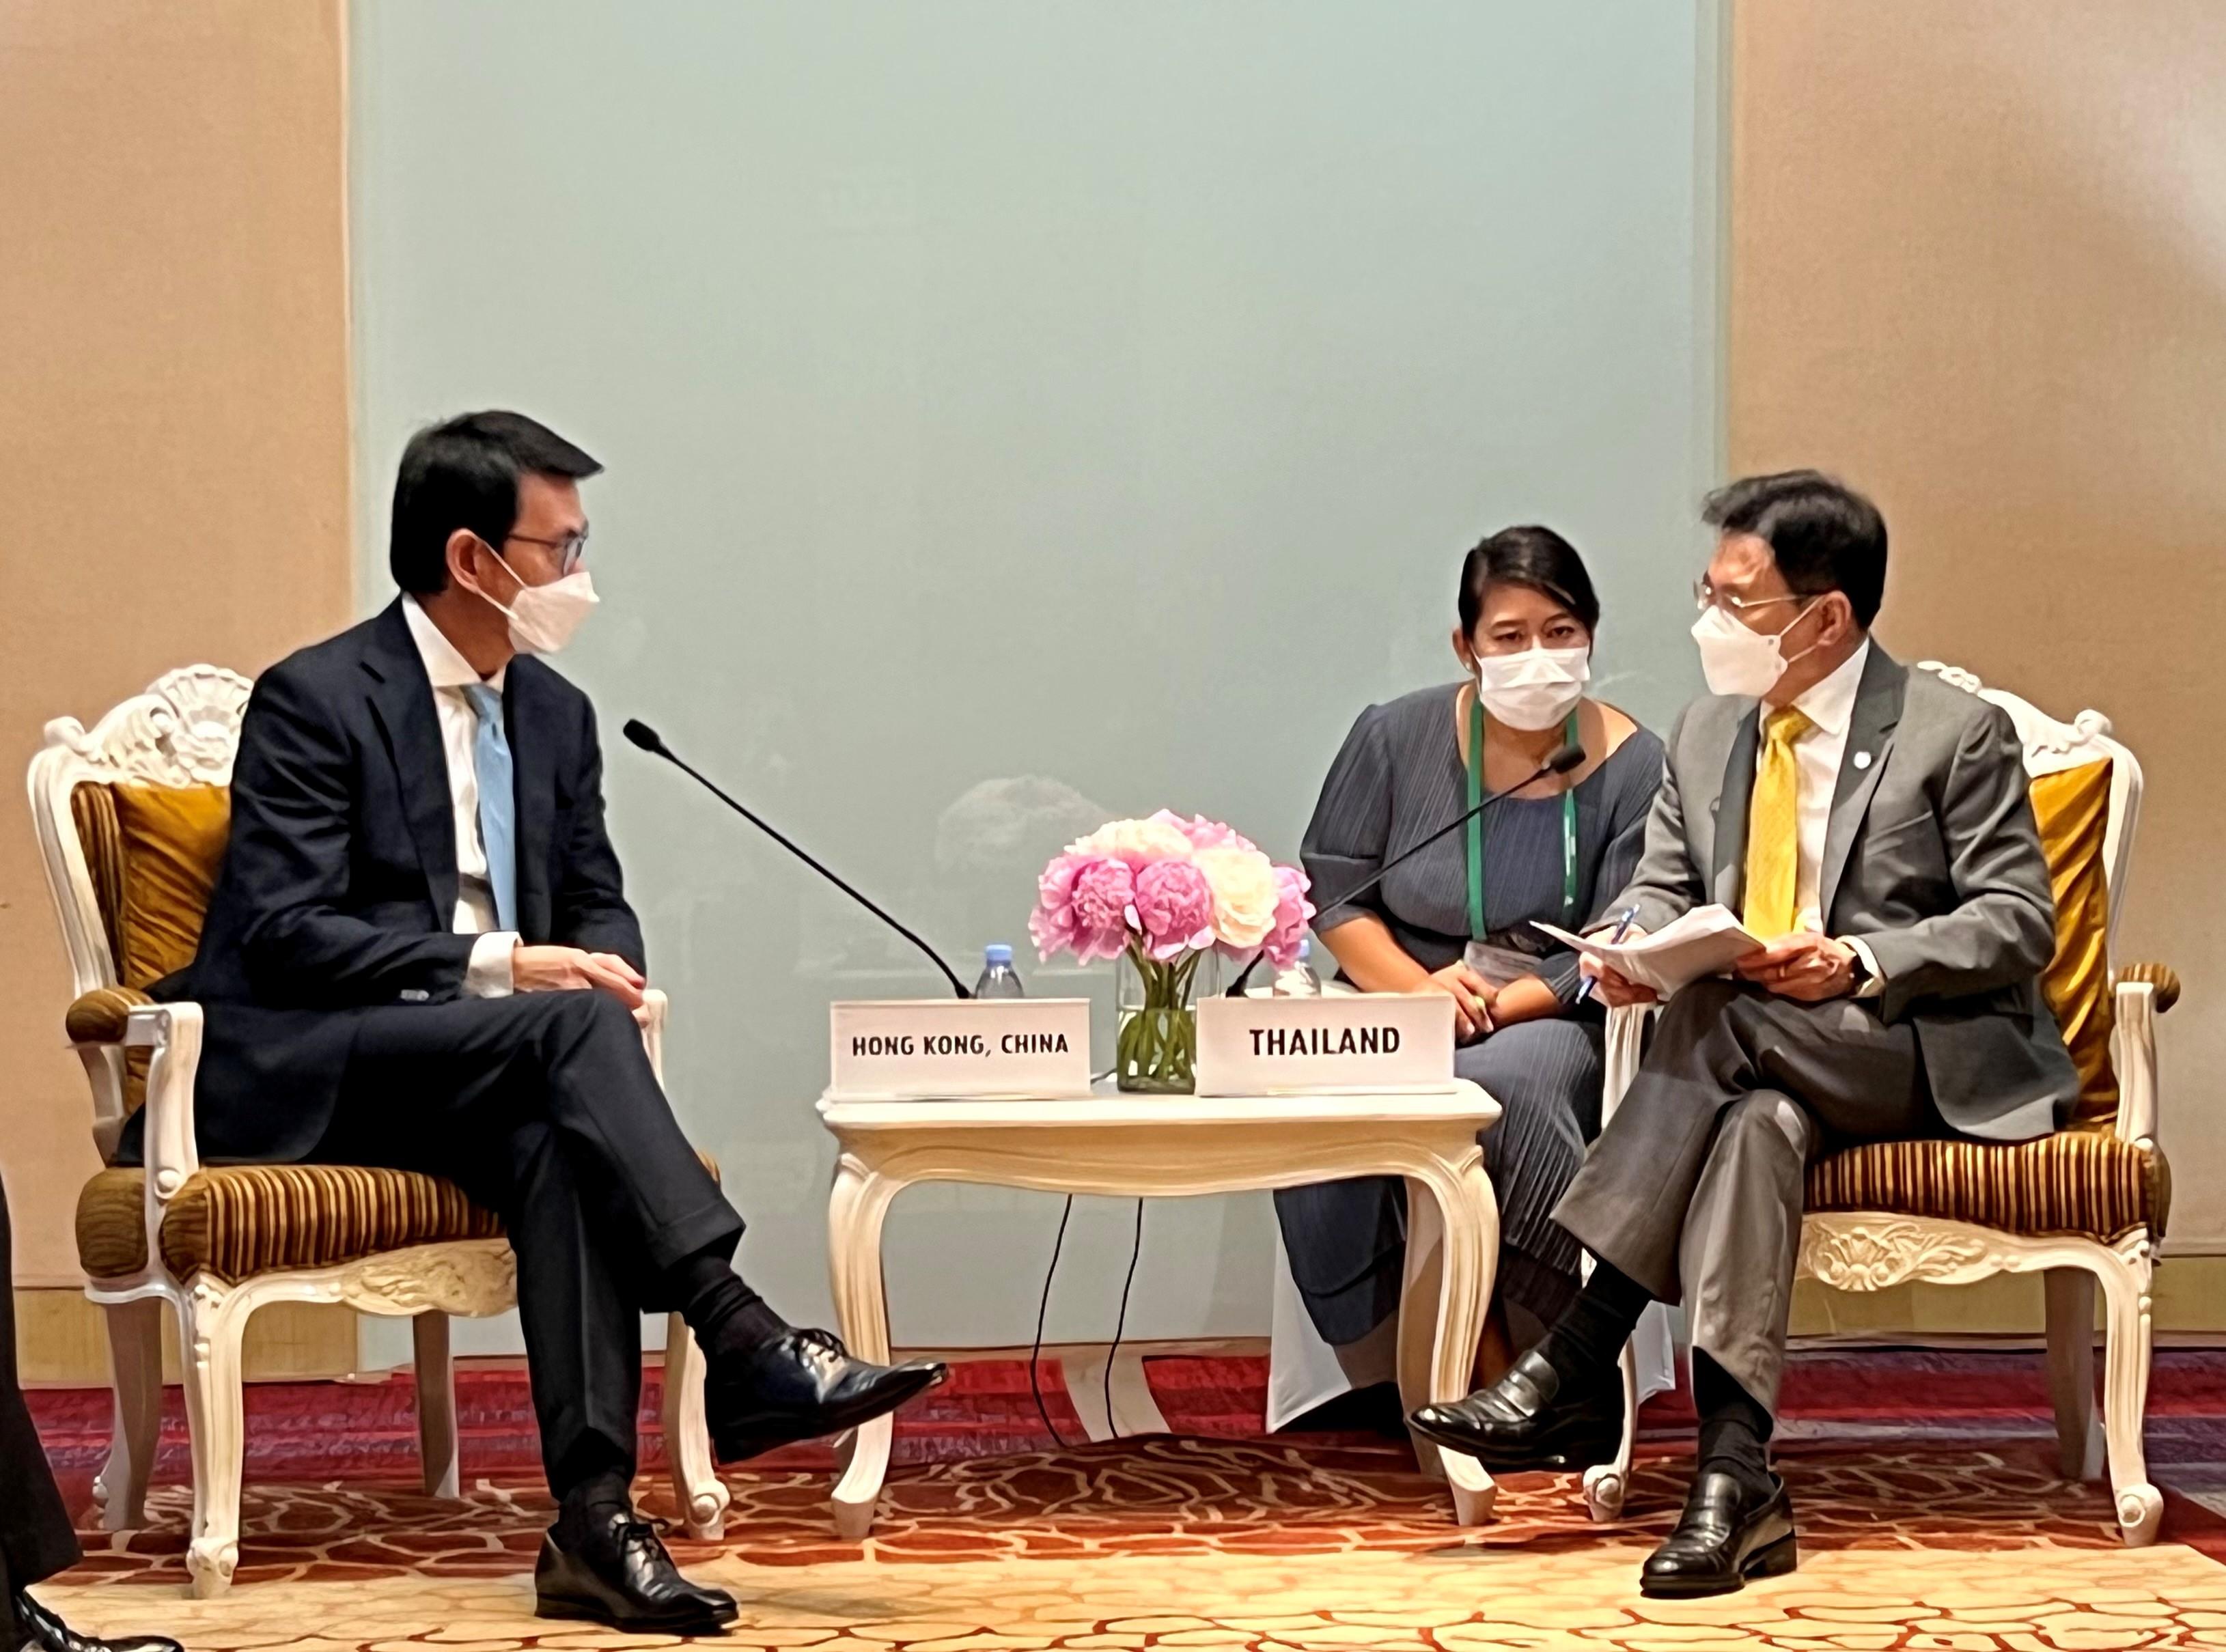 The Secretary for Commerce and Economic Development, Mr Edward Yau (left), met with the Deputy Prime Minister and Minister of Commerce of Thailand, Mr Jurin Laksanawisit (right), in Bangkok, Thailand, today (May 19) to exchange views on trade and economic issues.